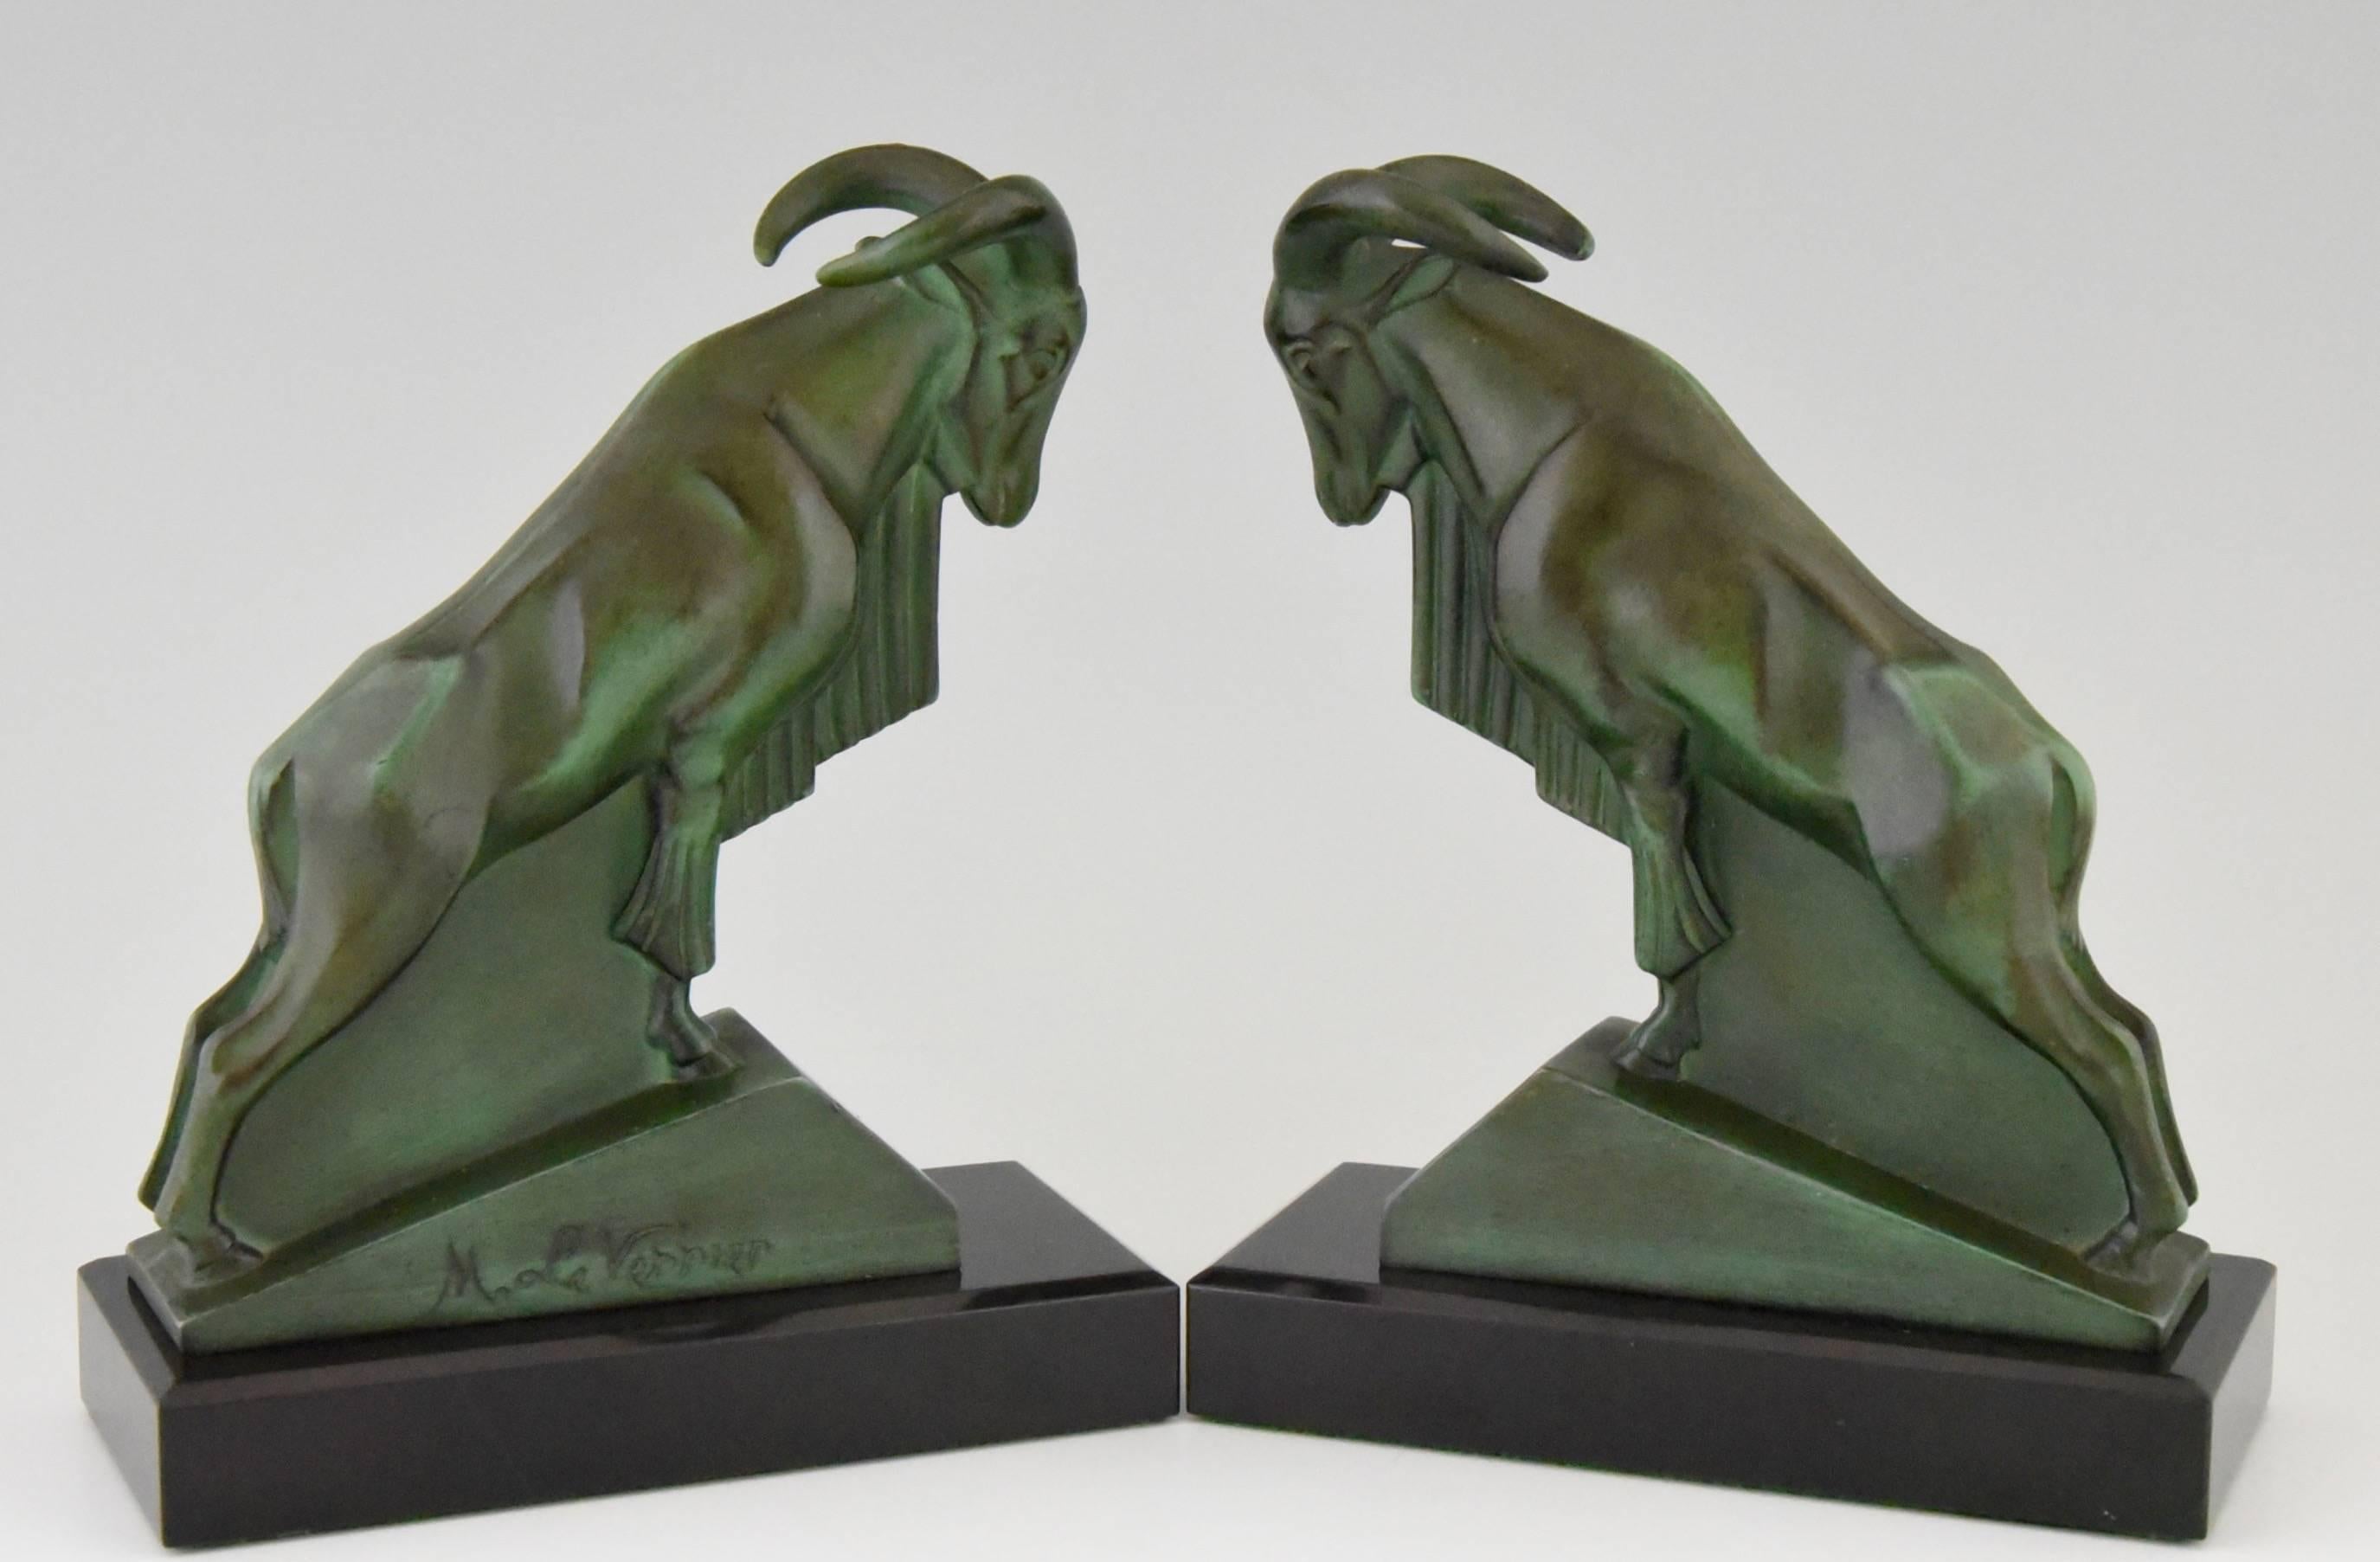 Description:  Art Deco ram bookends. Artist / Maker: Max Le Verrier. Signature / Marks:  M. Le Verrier. Style:  Art Deco. Date:  1930. Material:  Green patinated metal.  Marble bases. Origin: France. Size of one:   H. 6.5 inch x L. 5.3 inch x W. 2.4